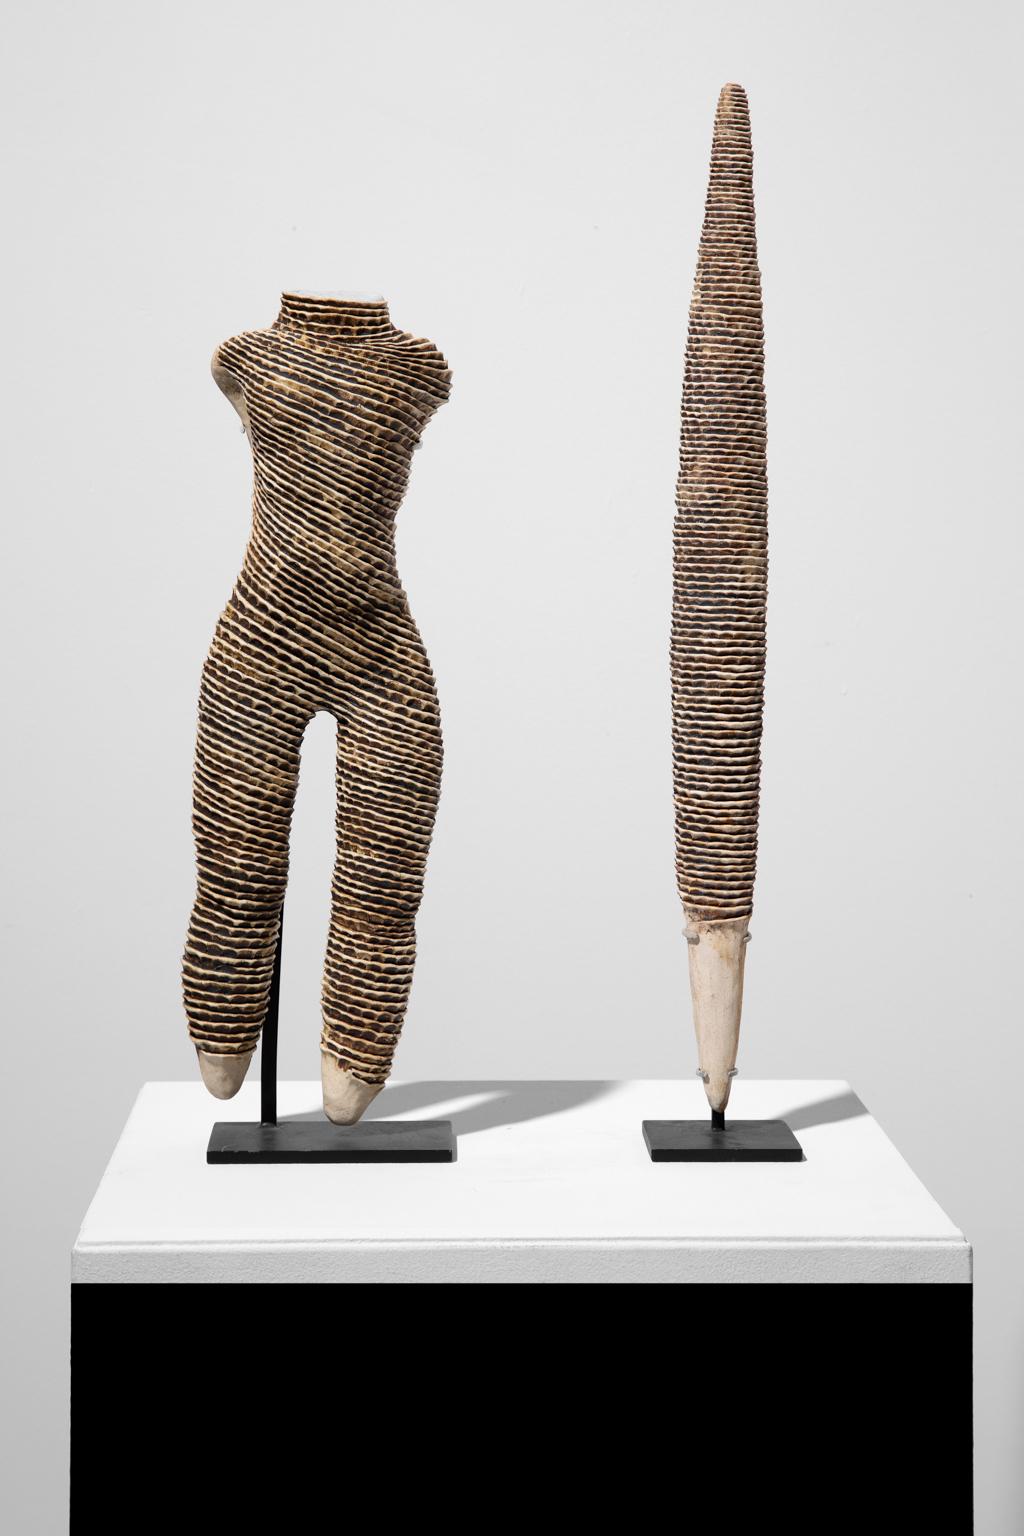 Two Untitled pieces made of ceramic with black matt markings are exquisite and purely Michele Oka Doner works. On September 22, 2022, Michelle Oka Doner was a lecturer at the University of Michigan's Penny Stamps Distinguished Speaker Series in